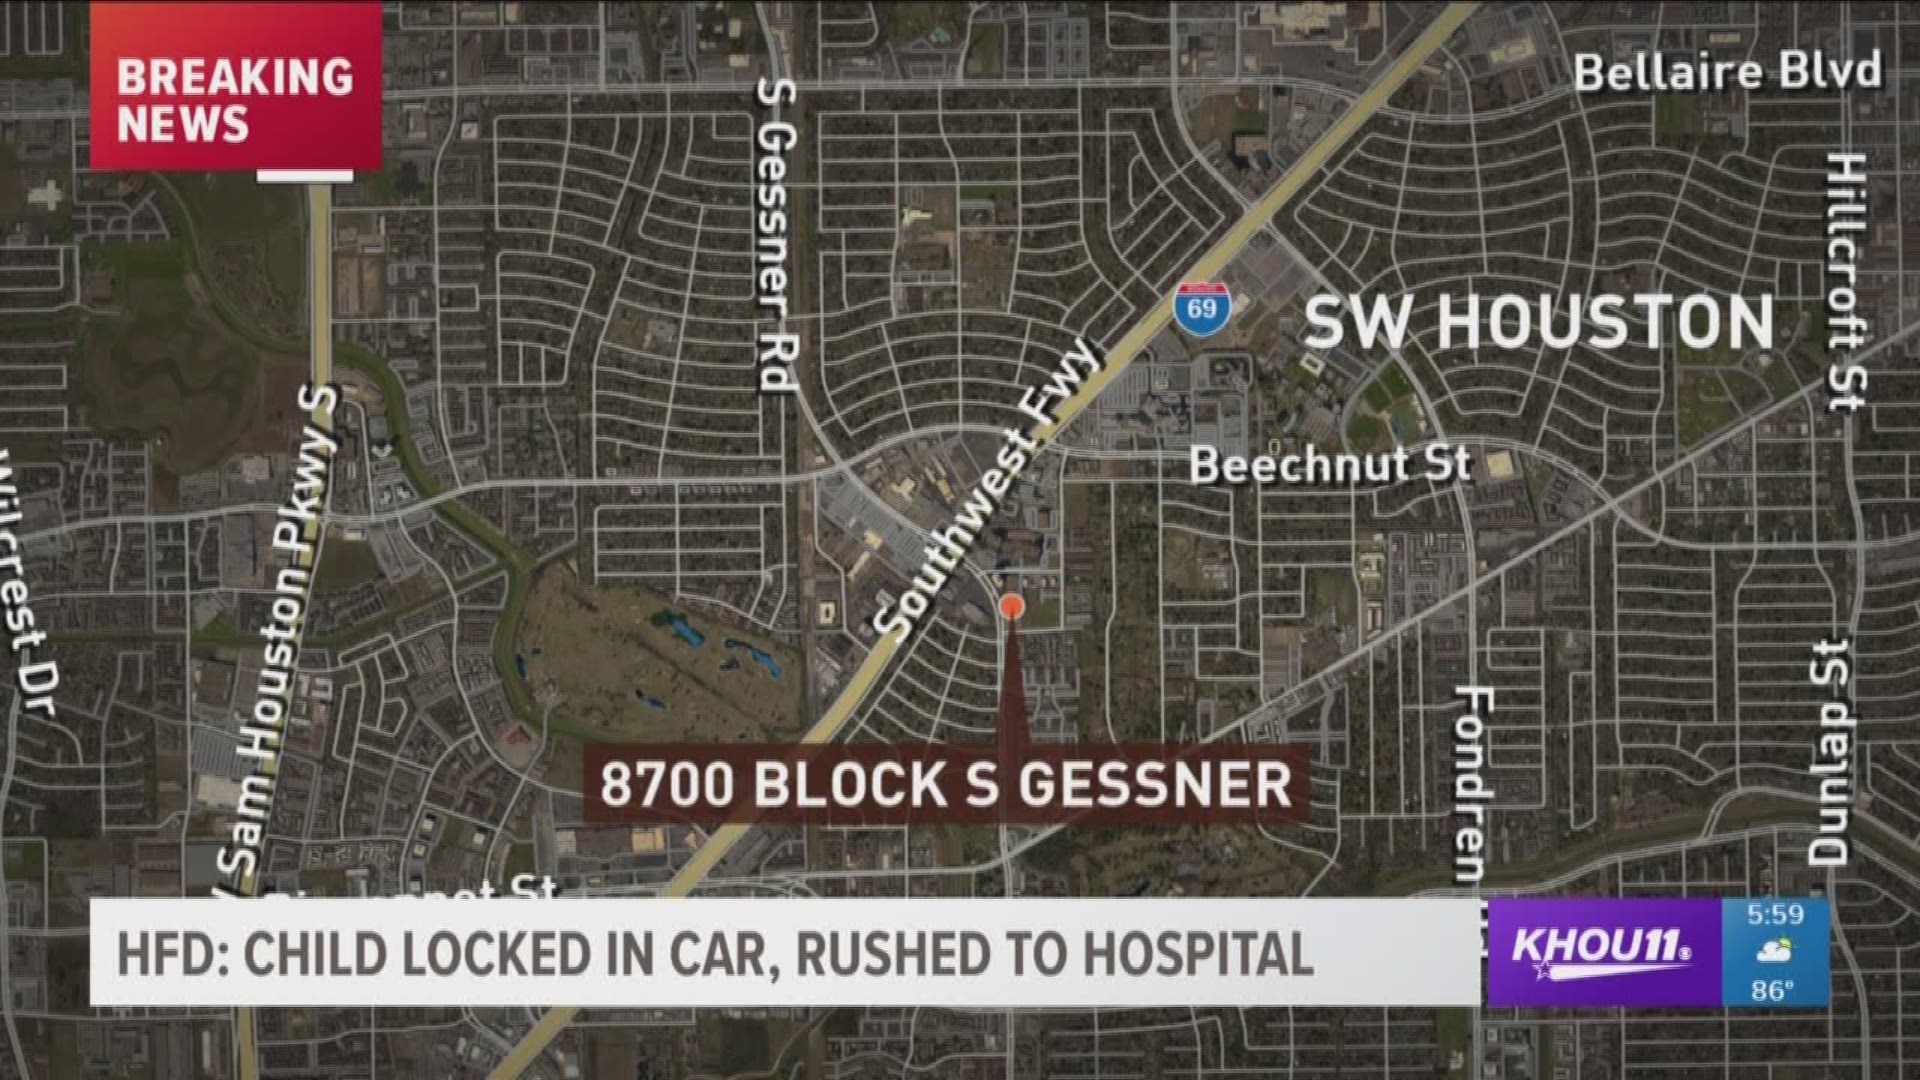 A 3-year-old child was rushed to the hospital after being left in a hot car in southwest Houston. The child was taken to Texas Children's Hospital just after 4 p.m. 